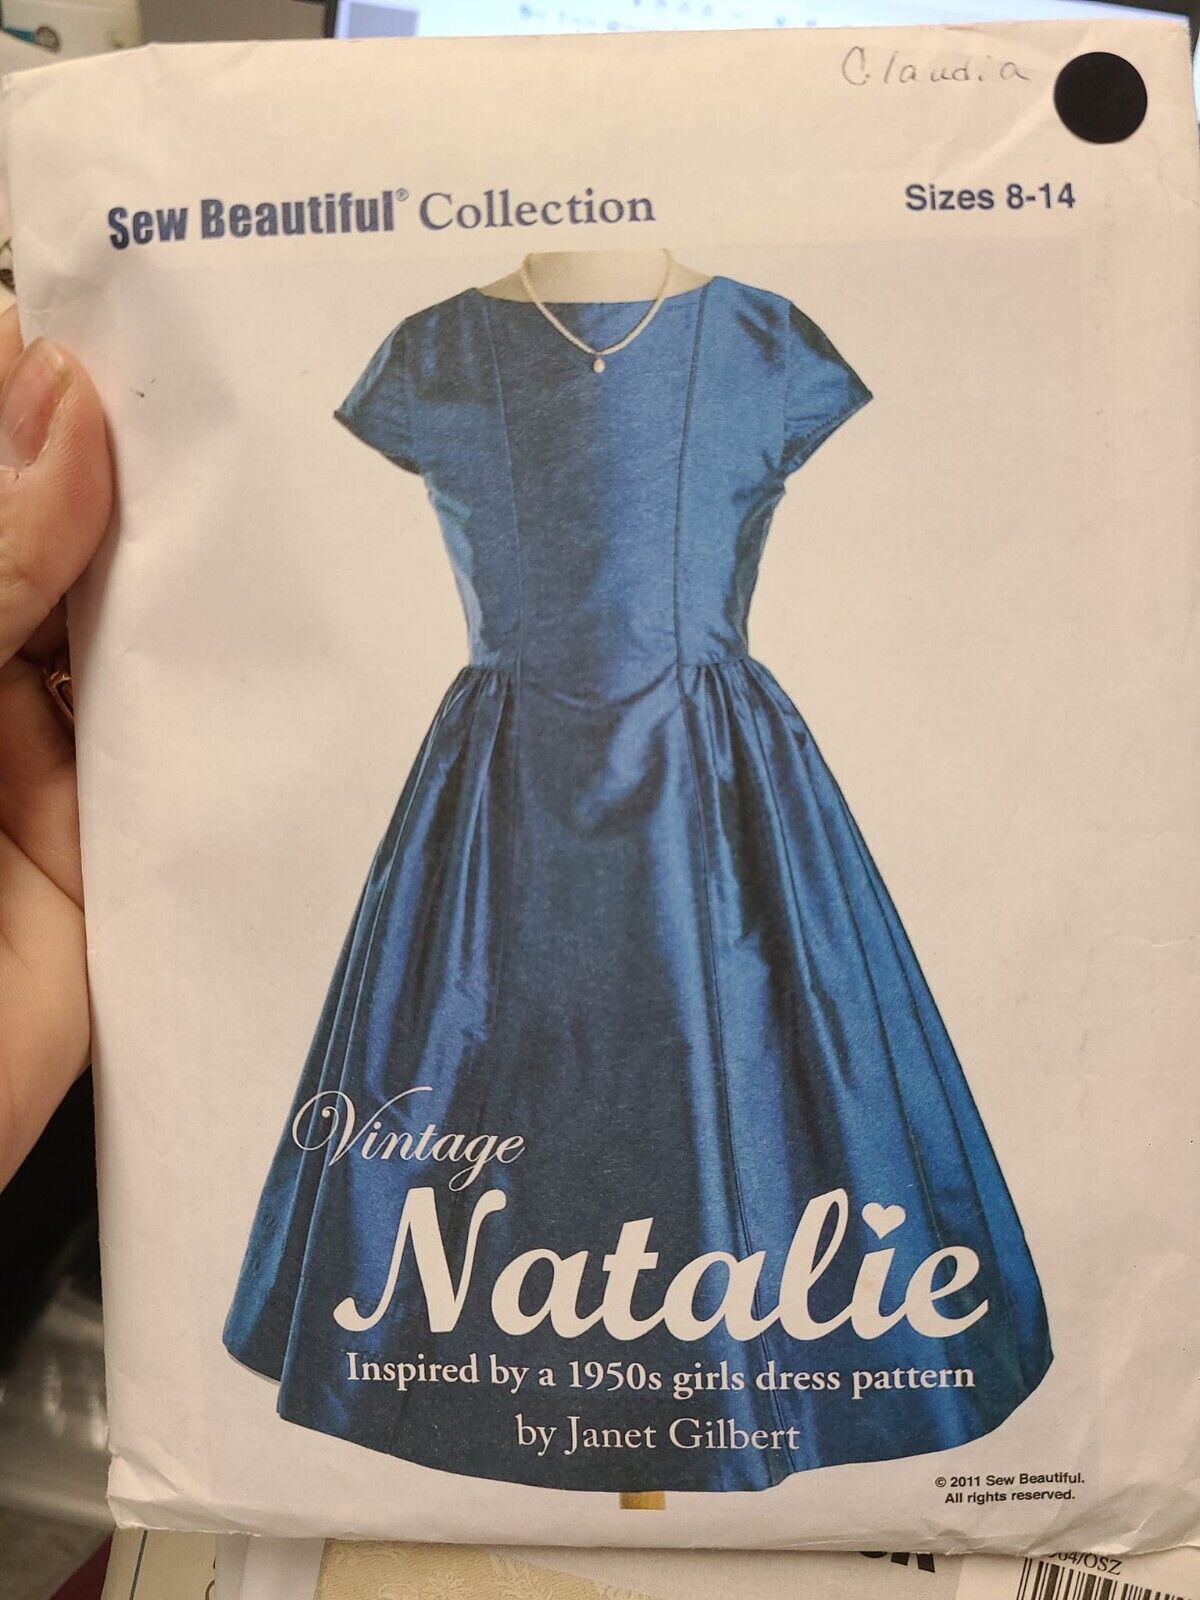 Vintage Natalie Sew Beautiful Collection Sewing Pattern Uncut Size 2-6 NEW